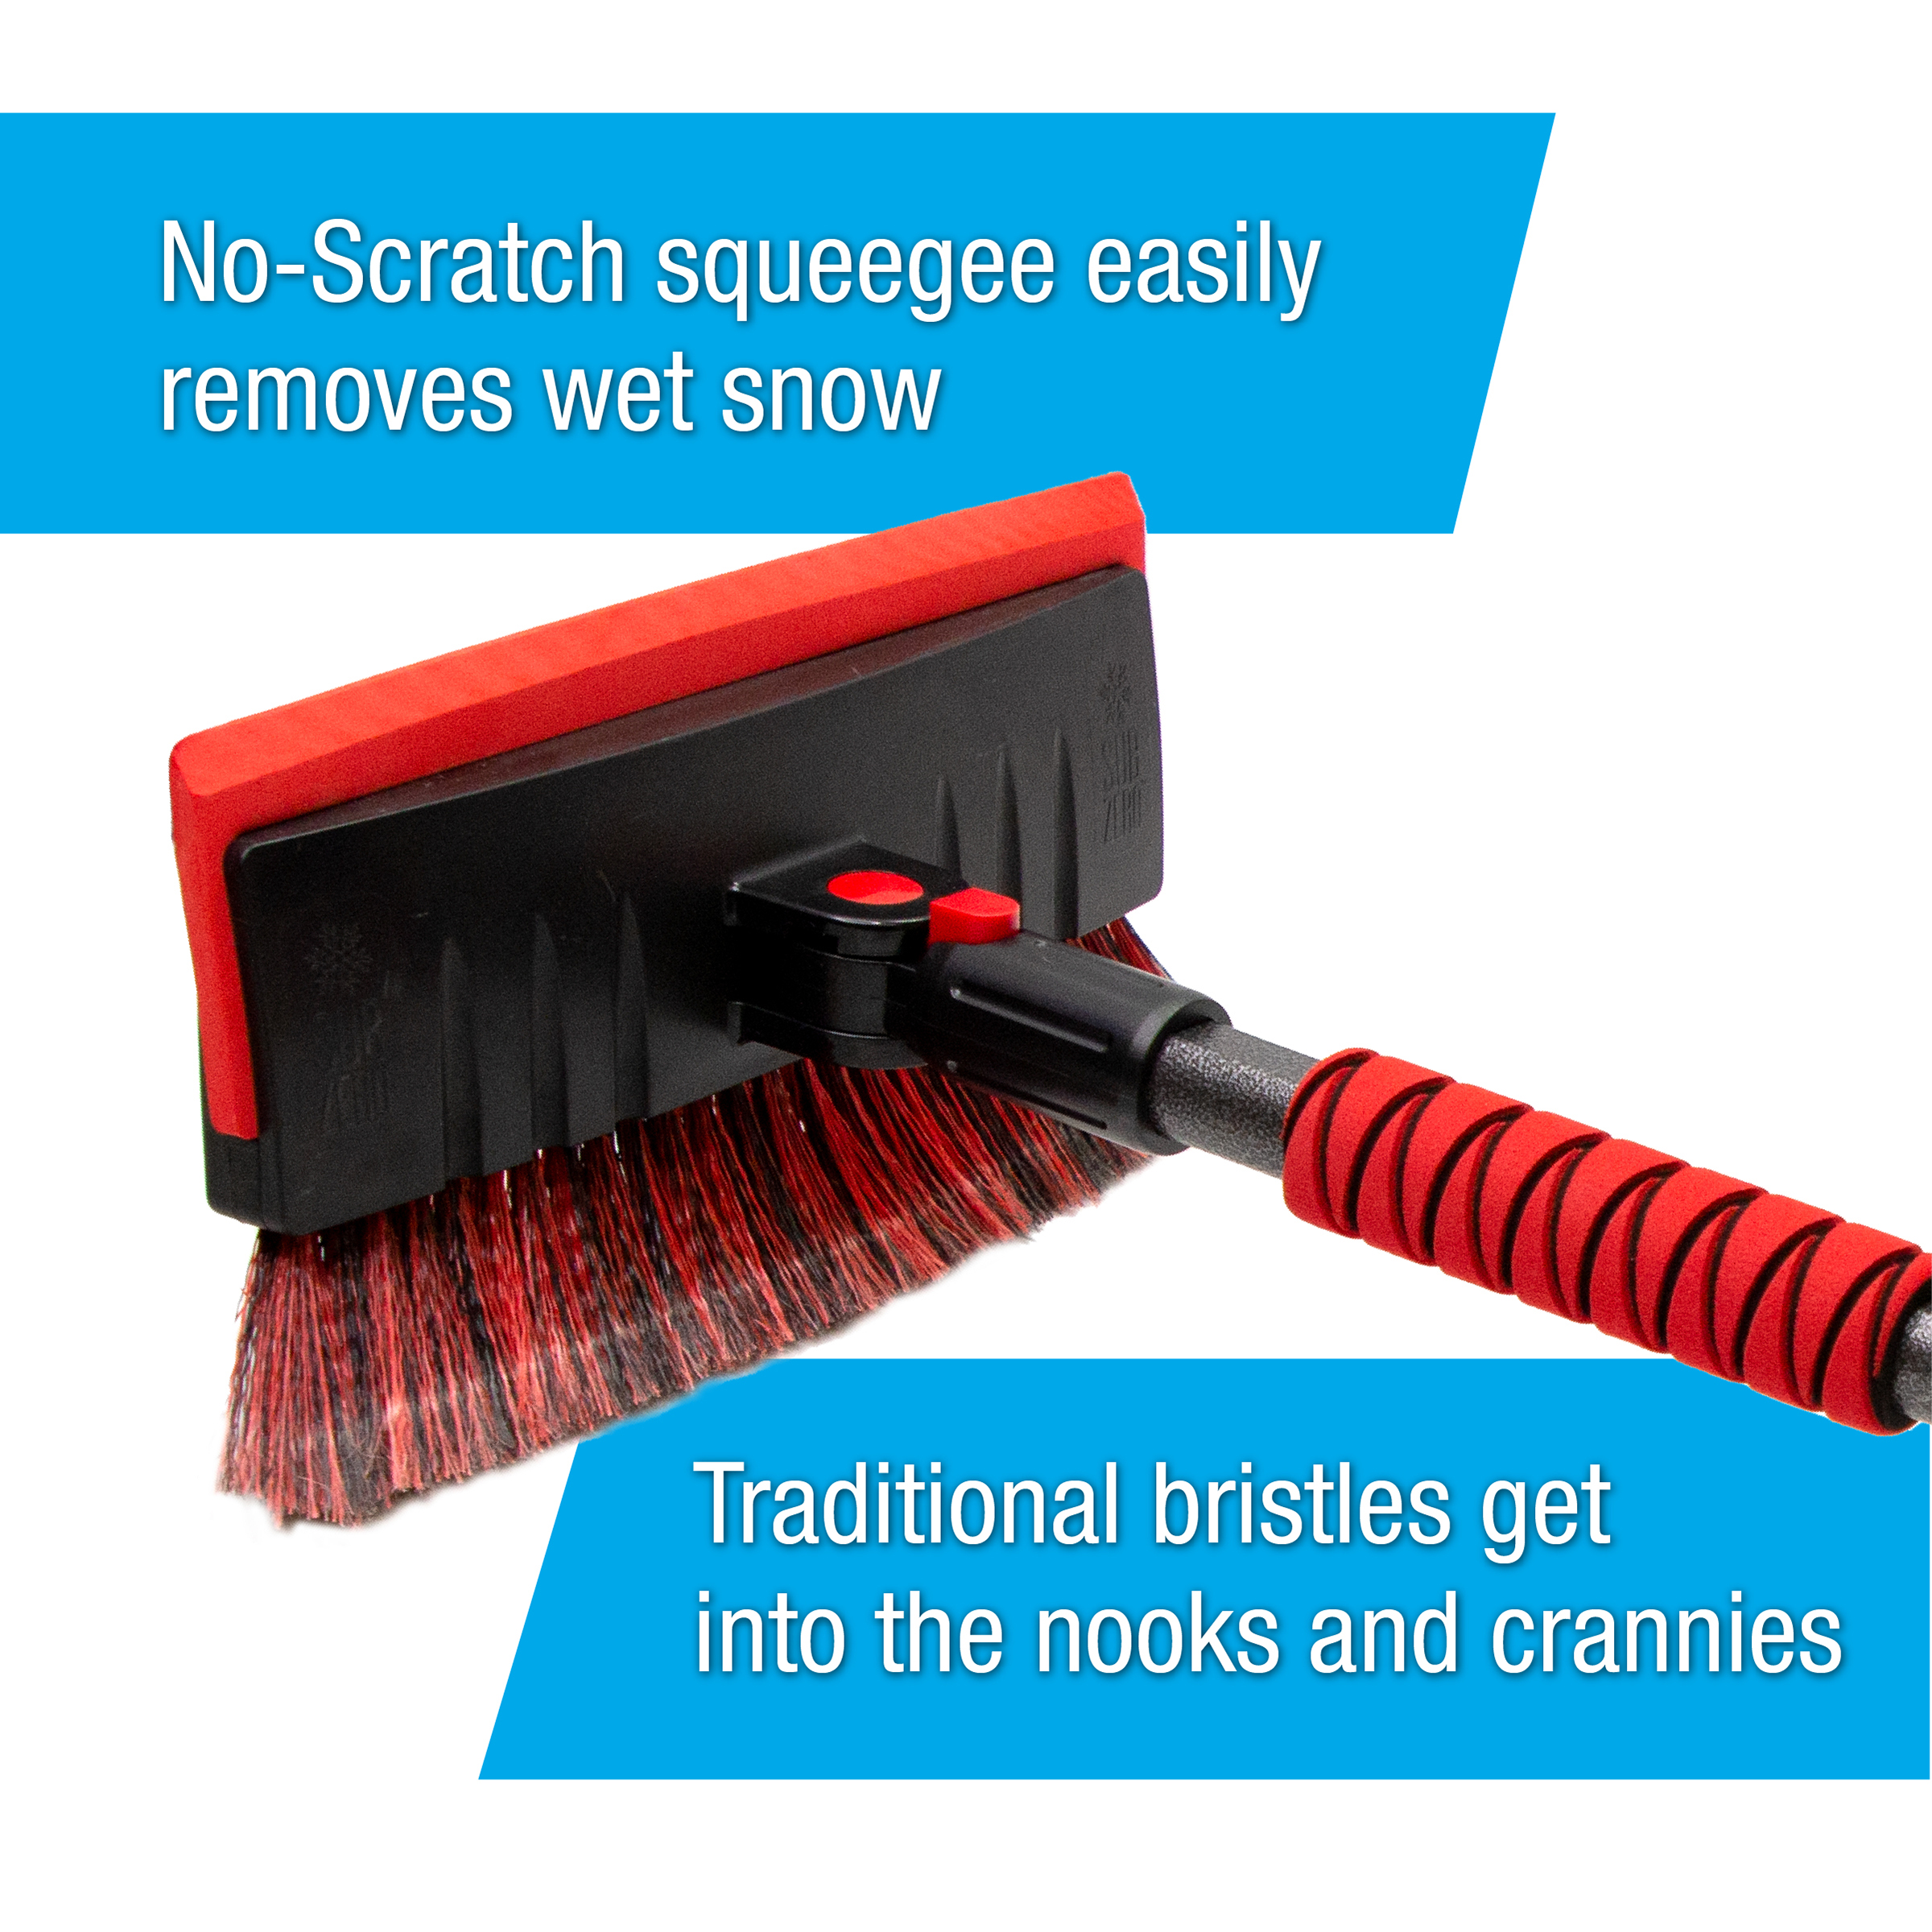 Subzero 60" Maxx Force Snowbroom with Ice Scraper, Red and Black, 1 Pack, 1220141061 - image 3 of 7